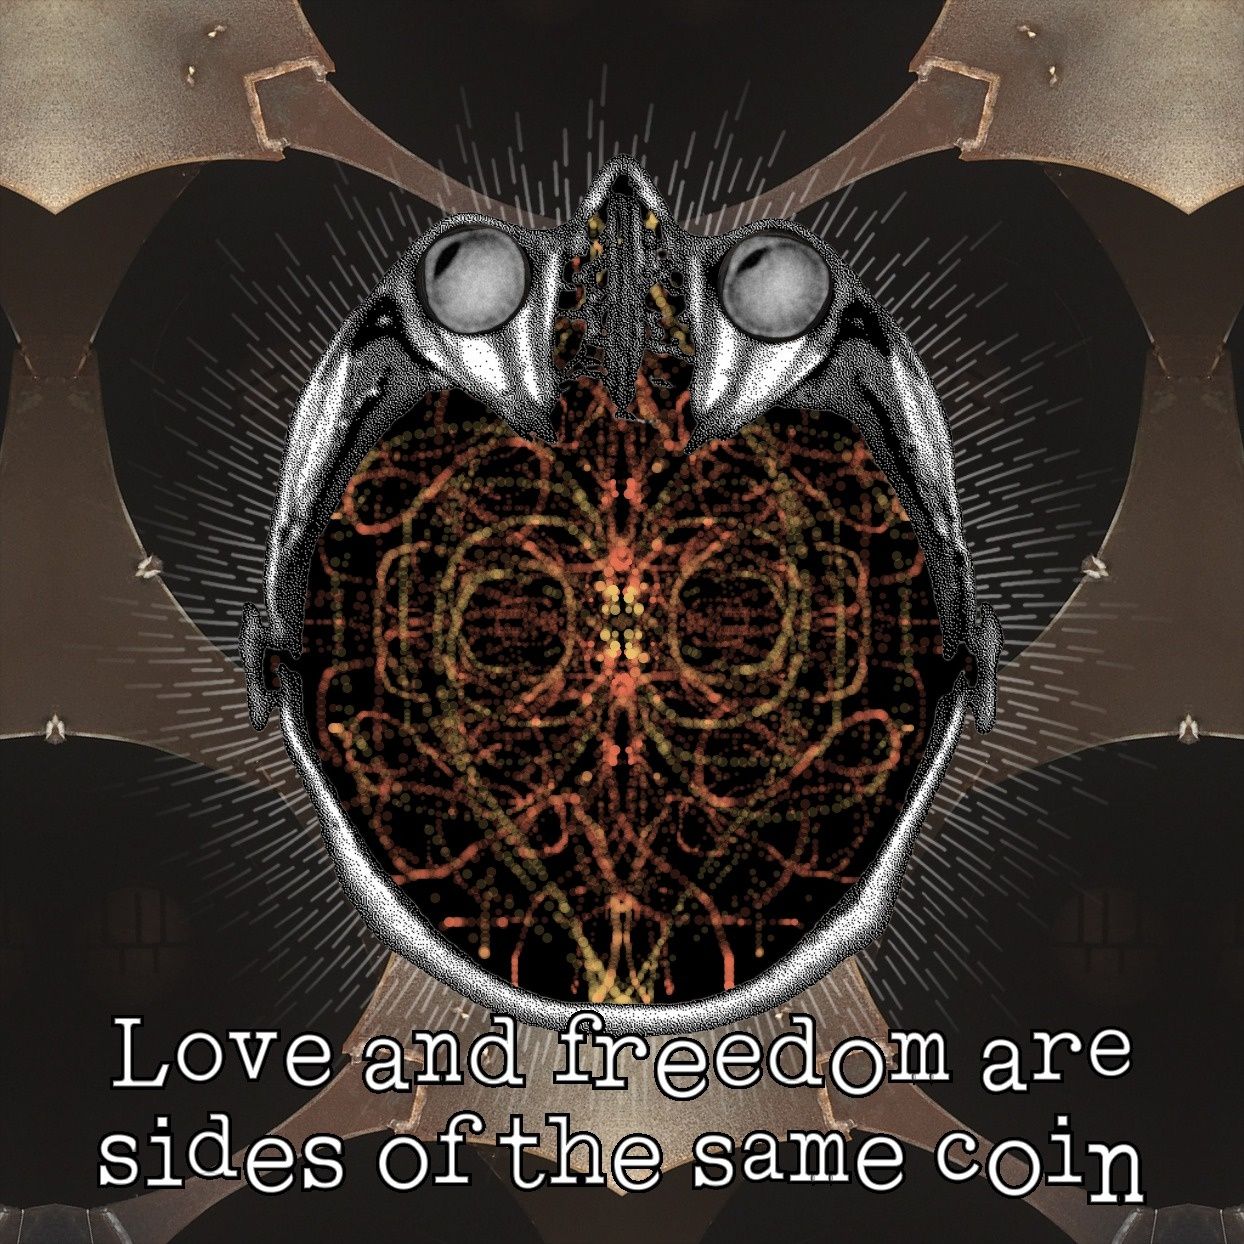 Love and freedom are sides of the same coin